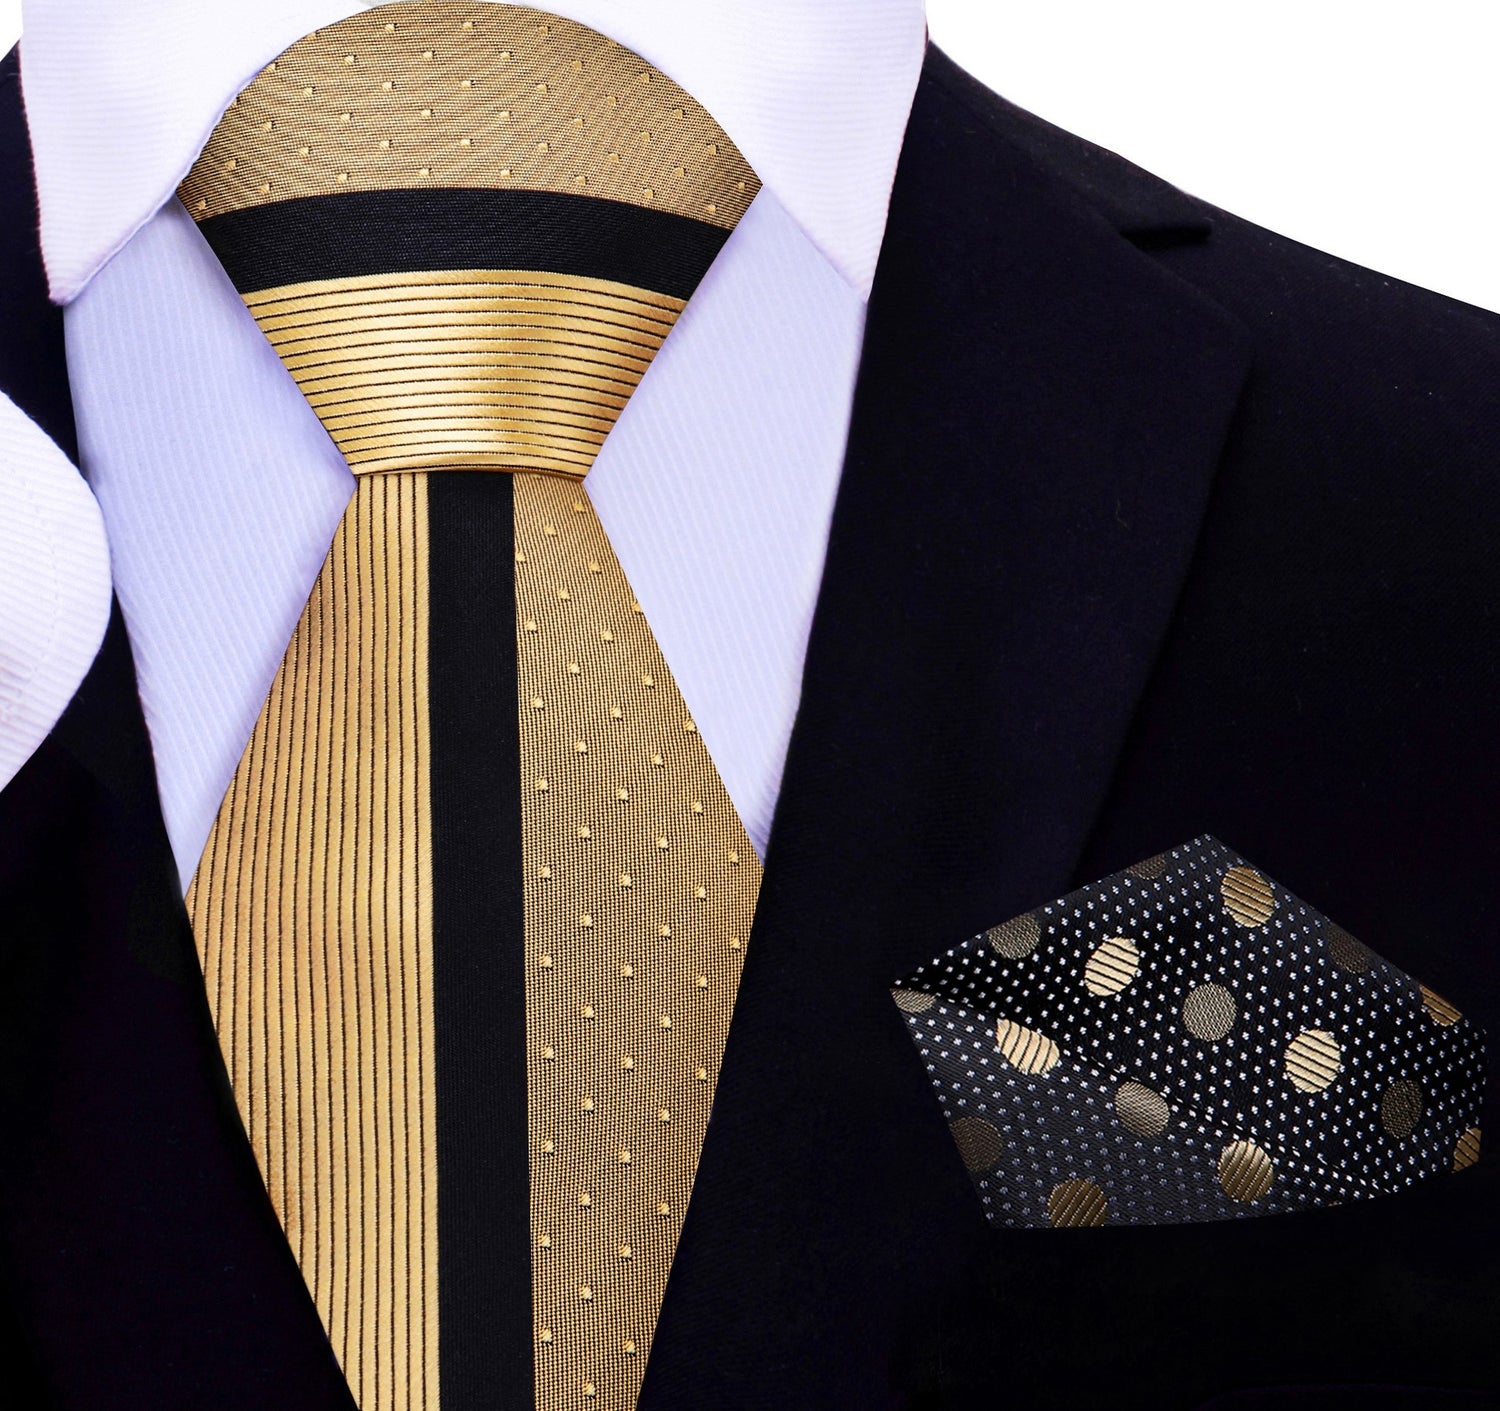 Gold, Black Tie and Accenting Square